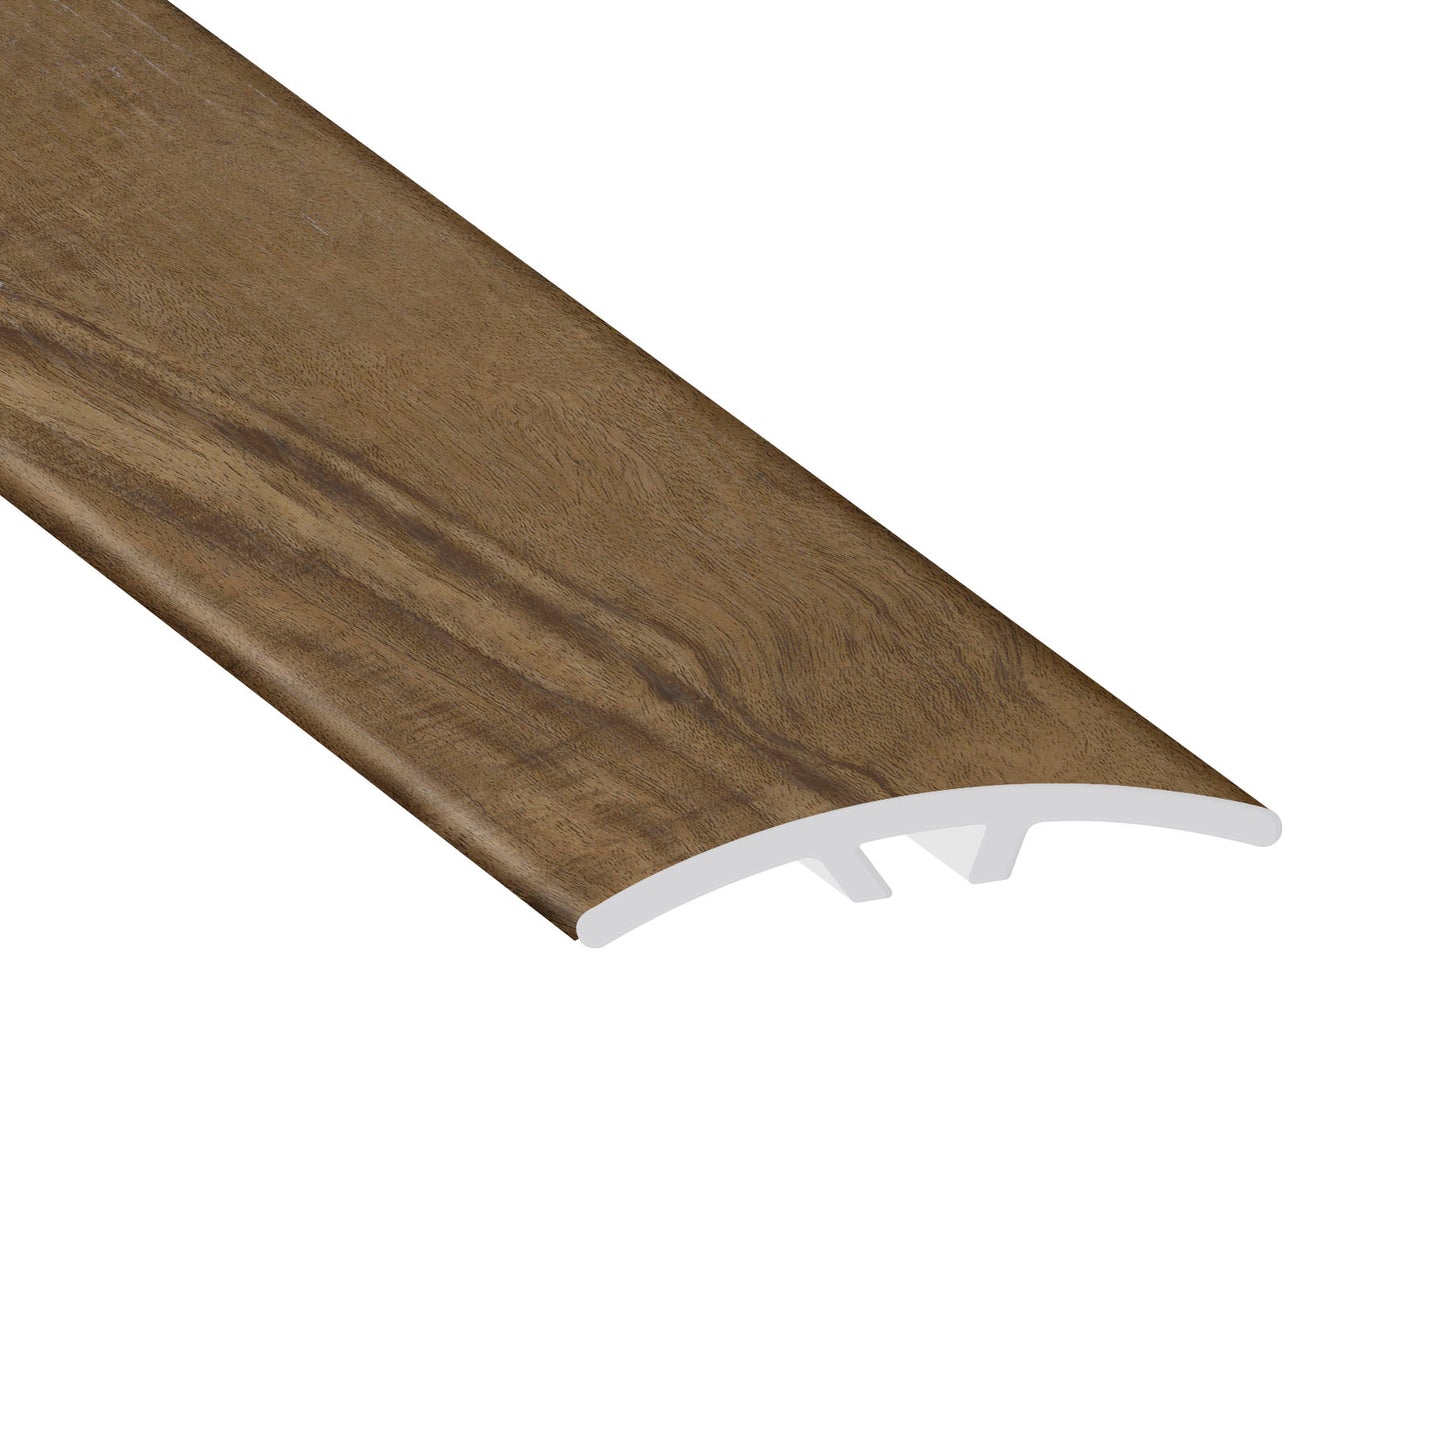 Tiger Acacia 0.23 in. Thich x 1.59 in. Width x 94 in. Length Multi-Purpose Reducer Vinyl Molding